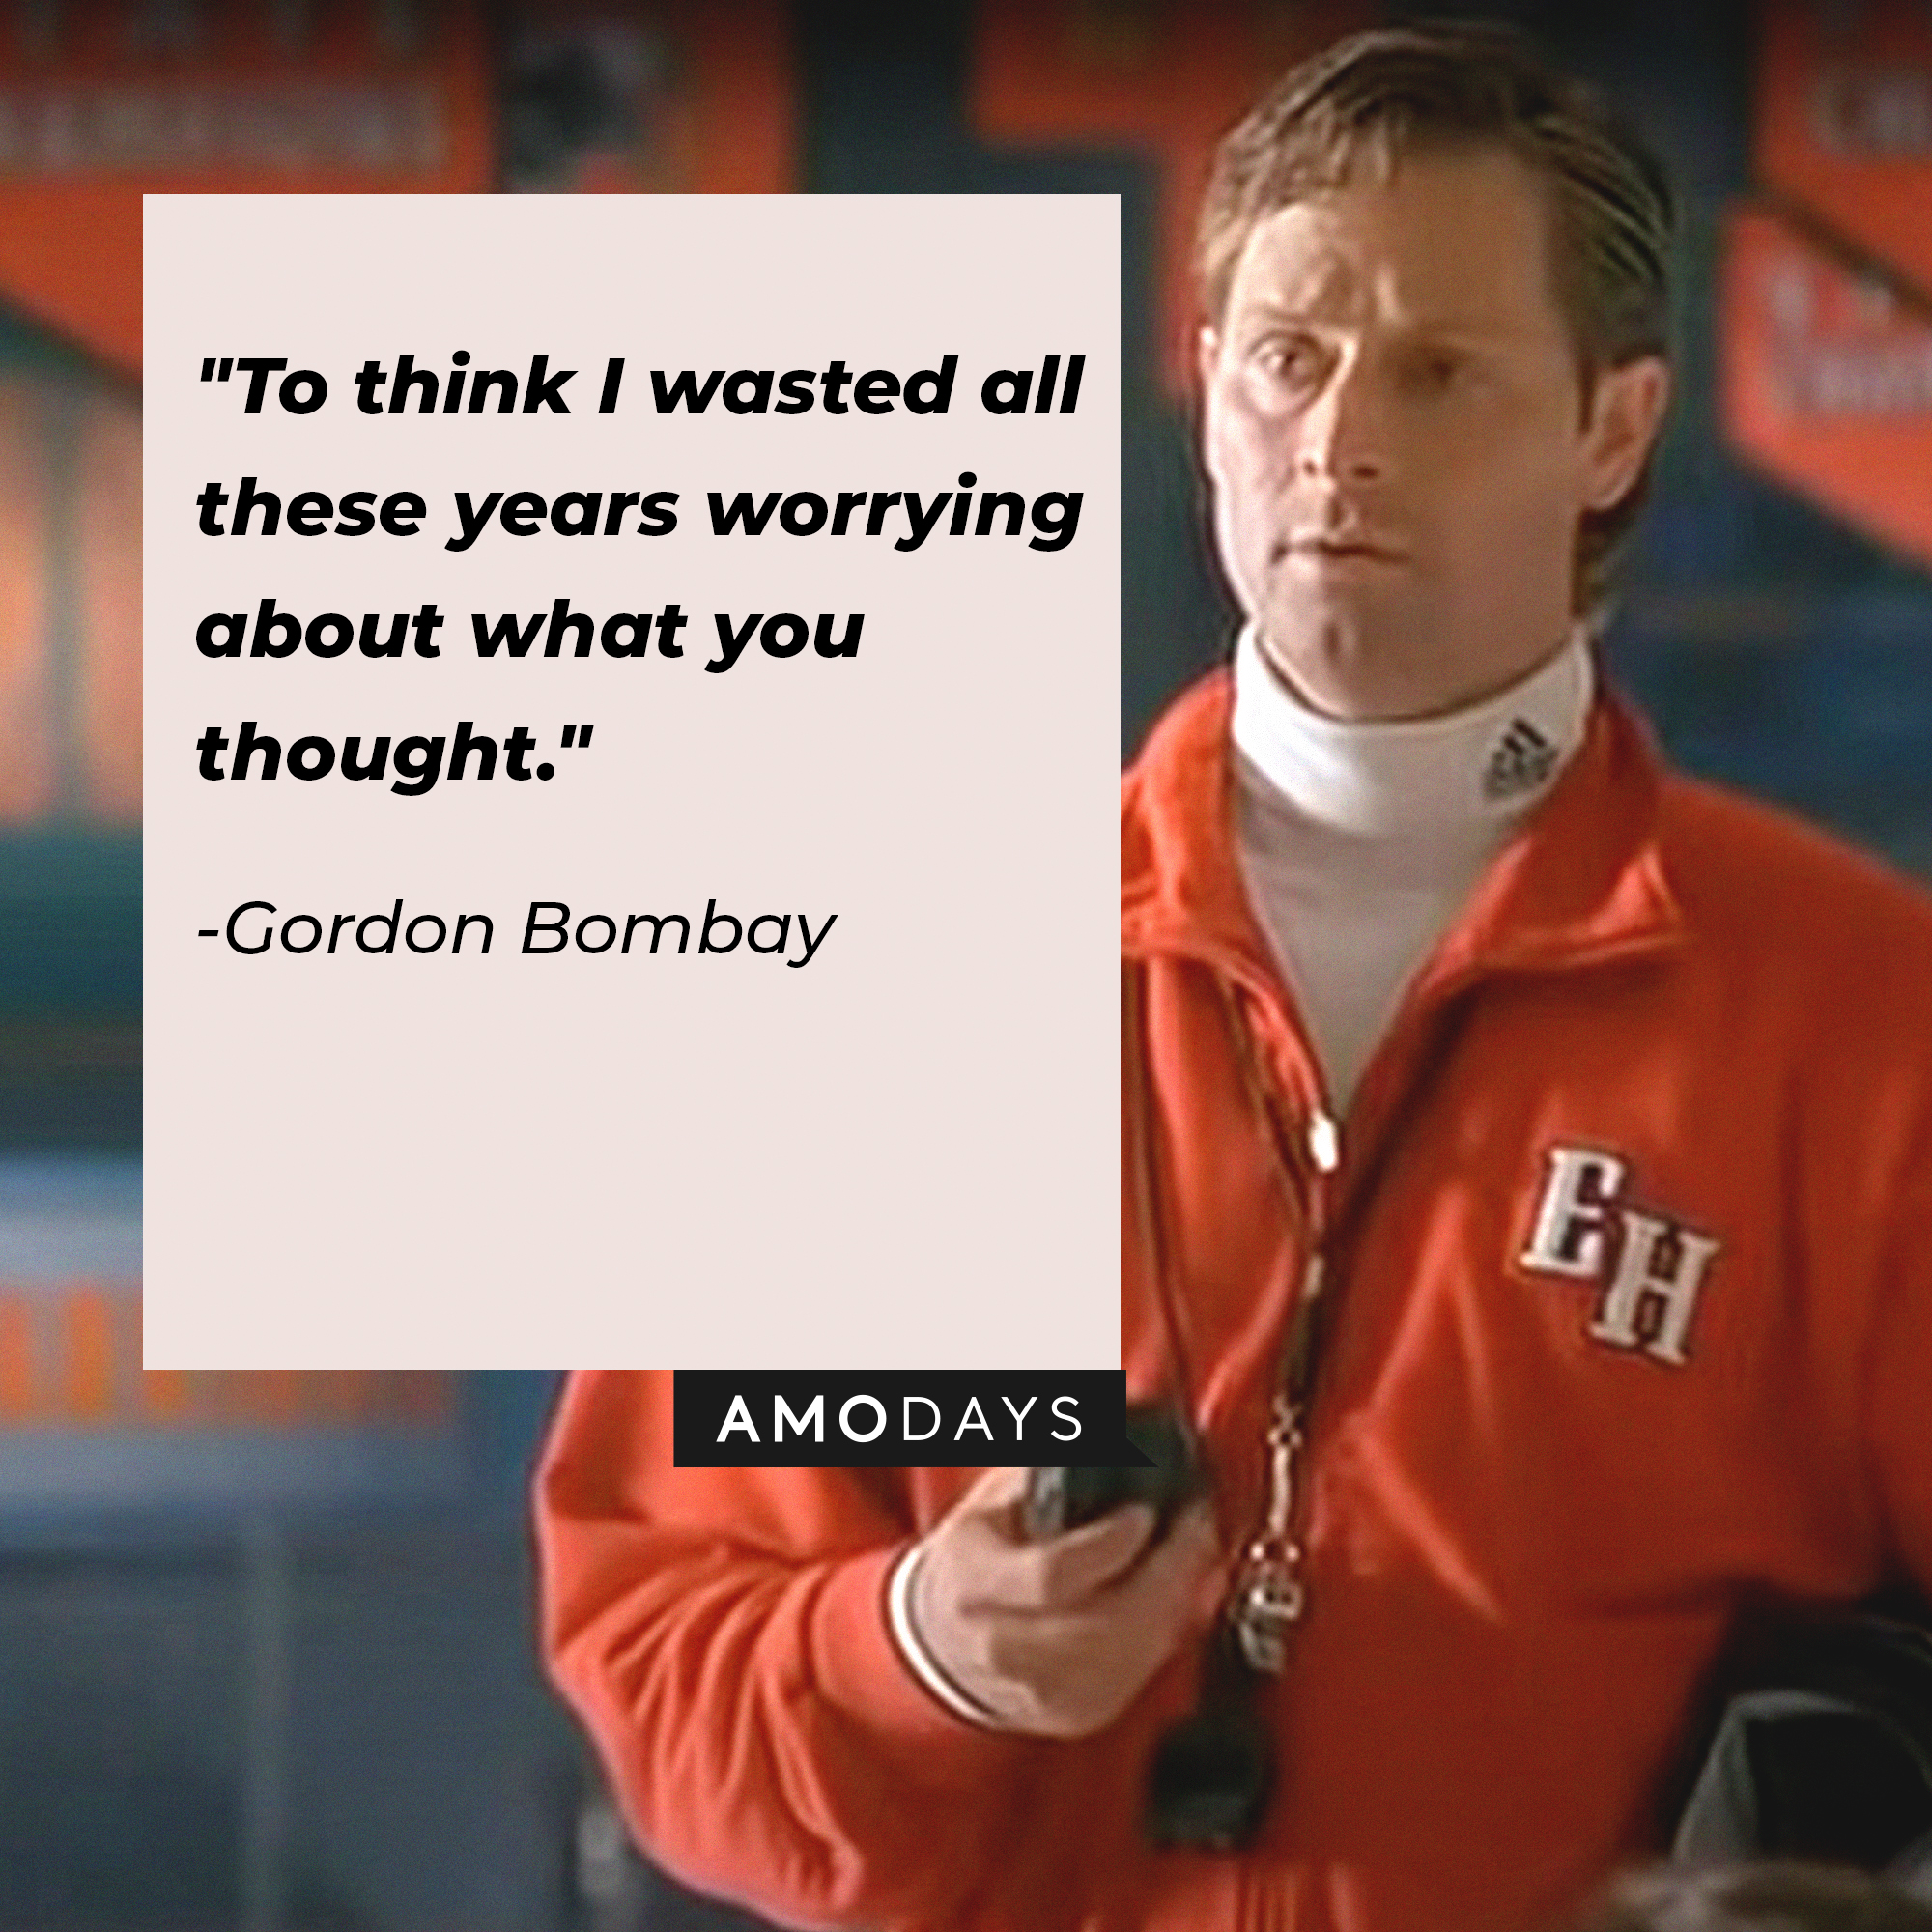 A picture of Gordon Bombay with a quote by him : "To think I wasted all these years worrying about what you thought." | Source: youtube.com/disneyplus